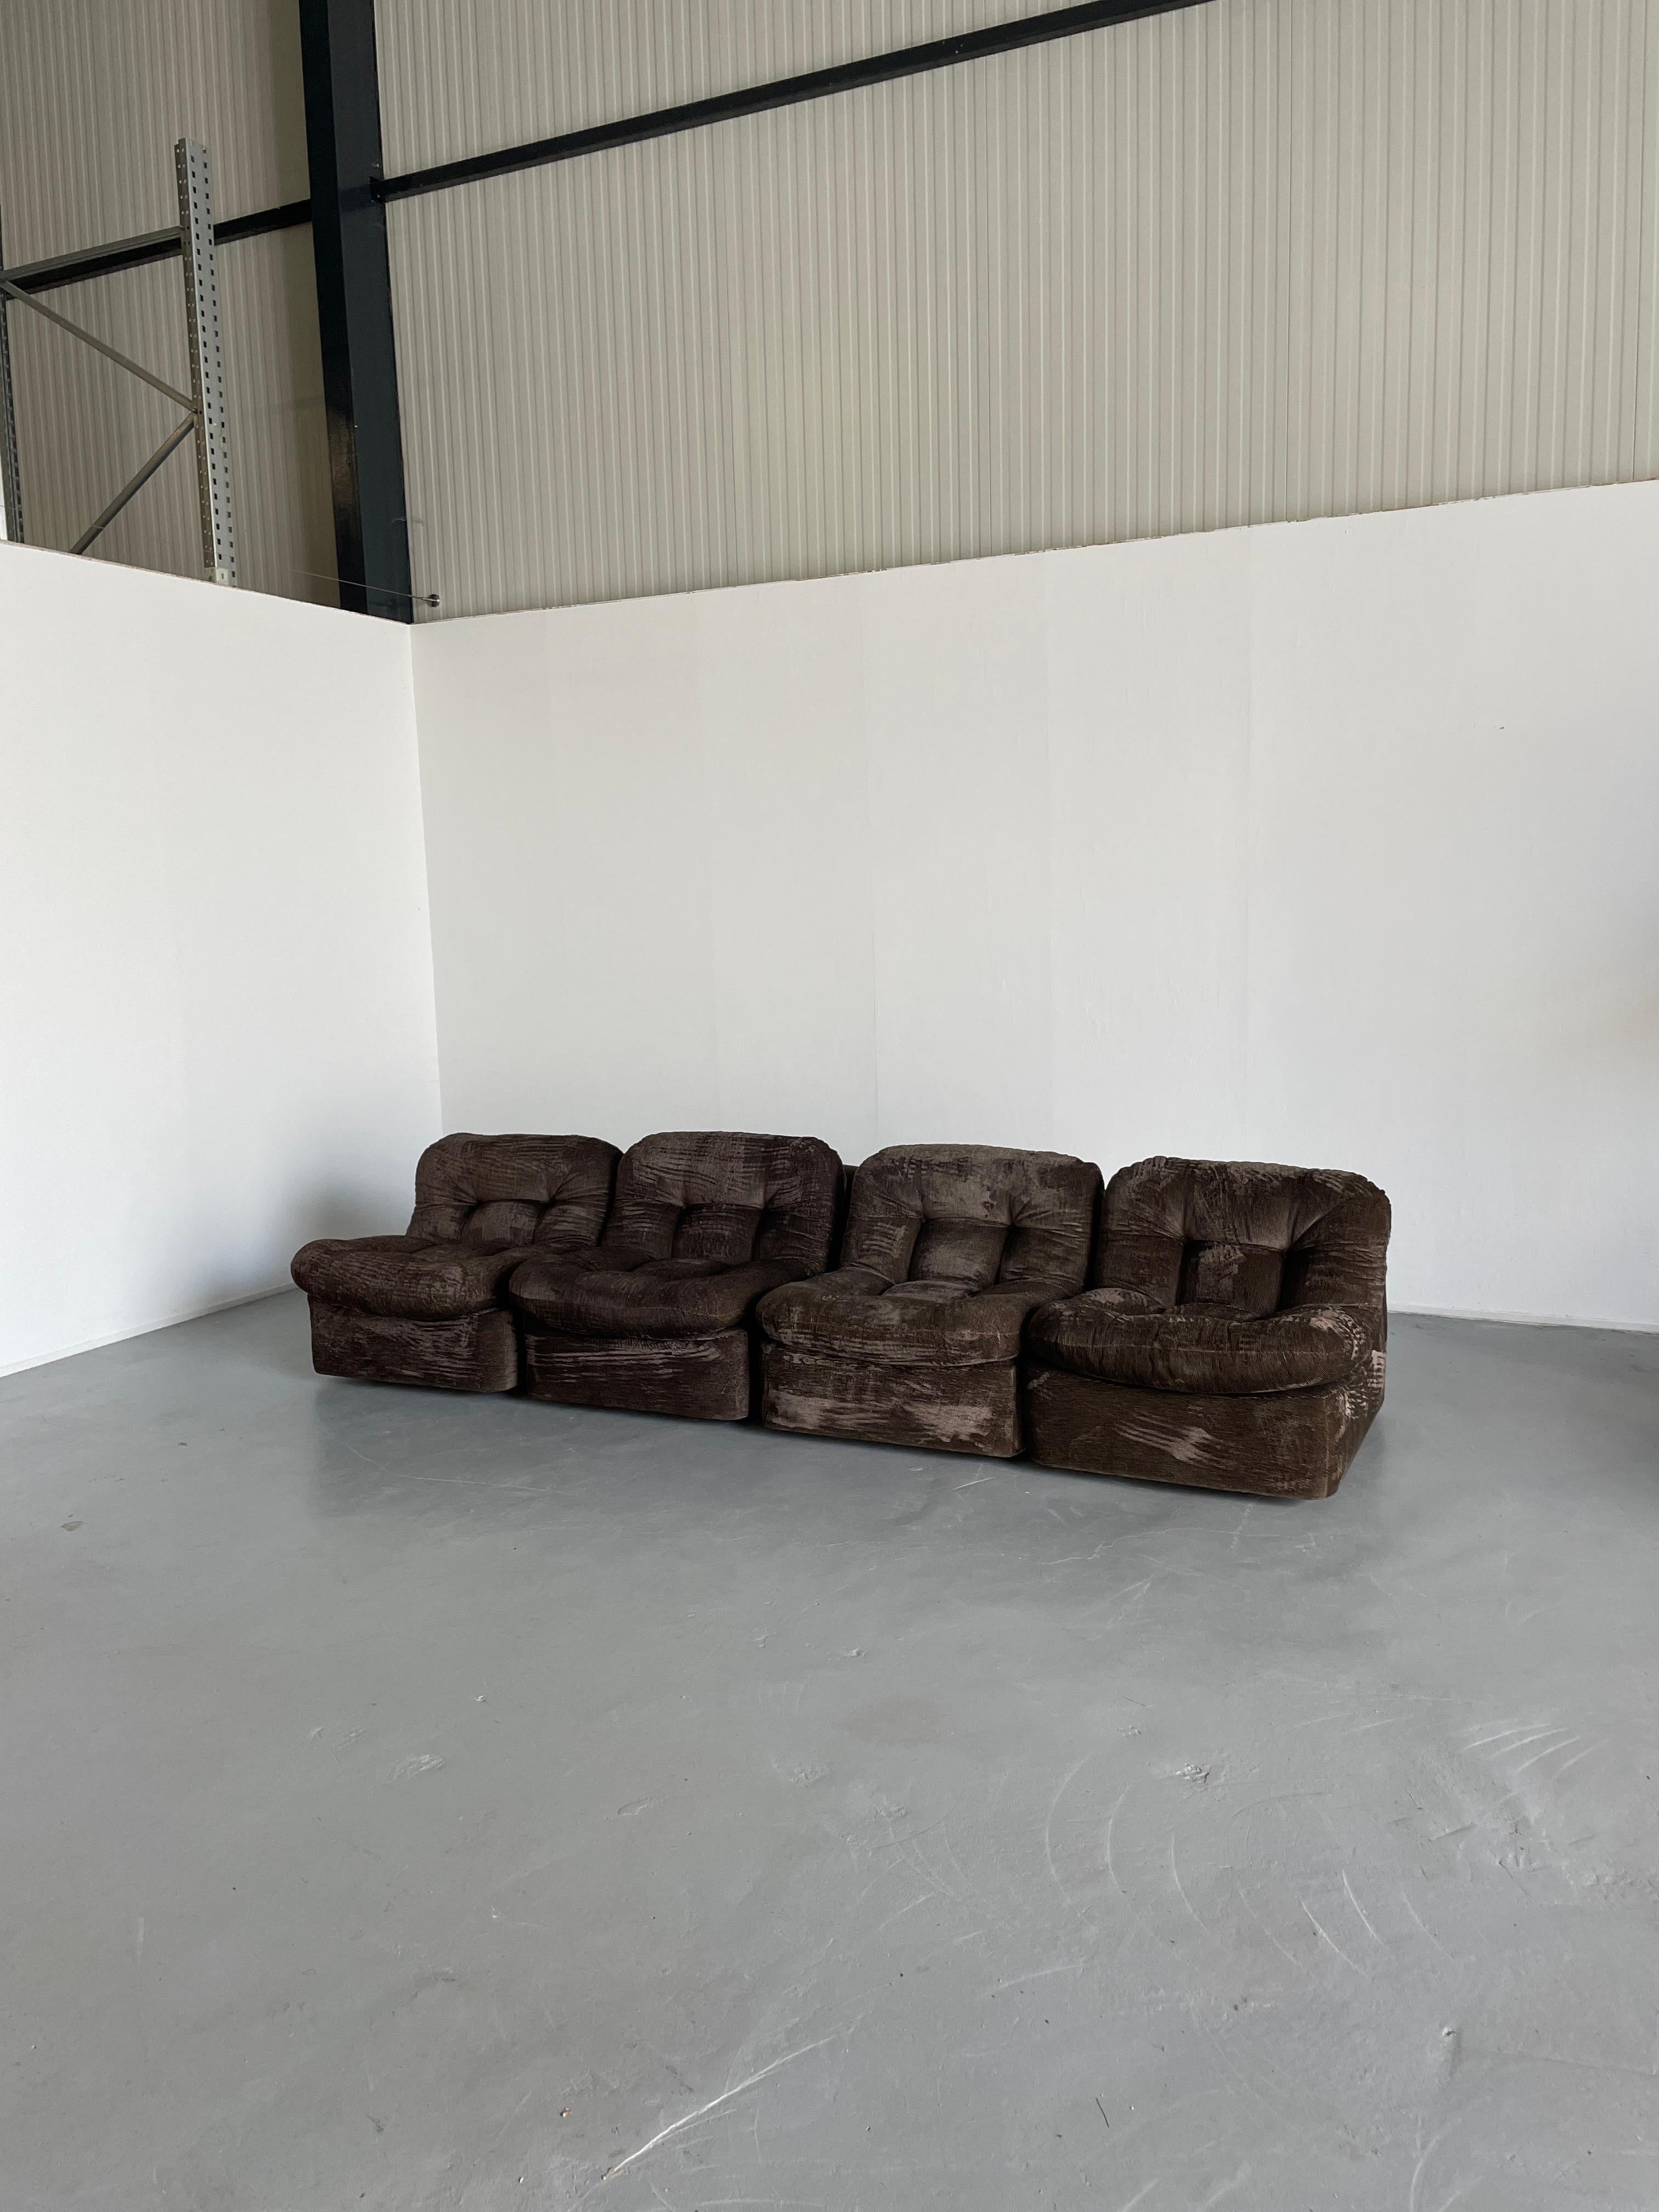 A beautiful four-part Mid-Century-Modern modular sofa in the style of Rino Maturi designed modular sofas, in original brown velvet upholstery.

A vintage Italian production, sourced from the original owners, bought in 1976./77.

Overall in excellent